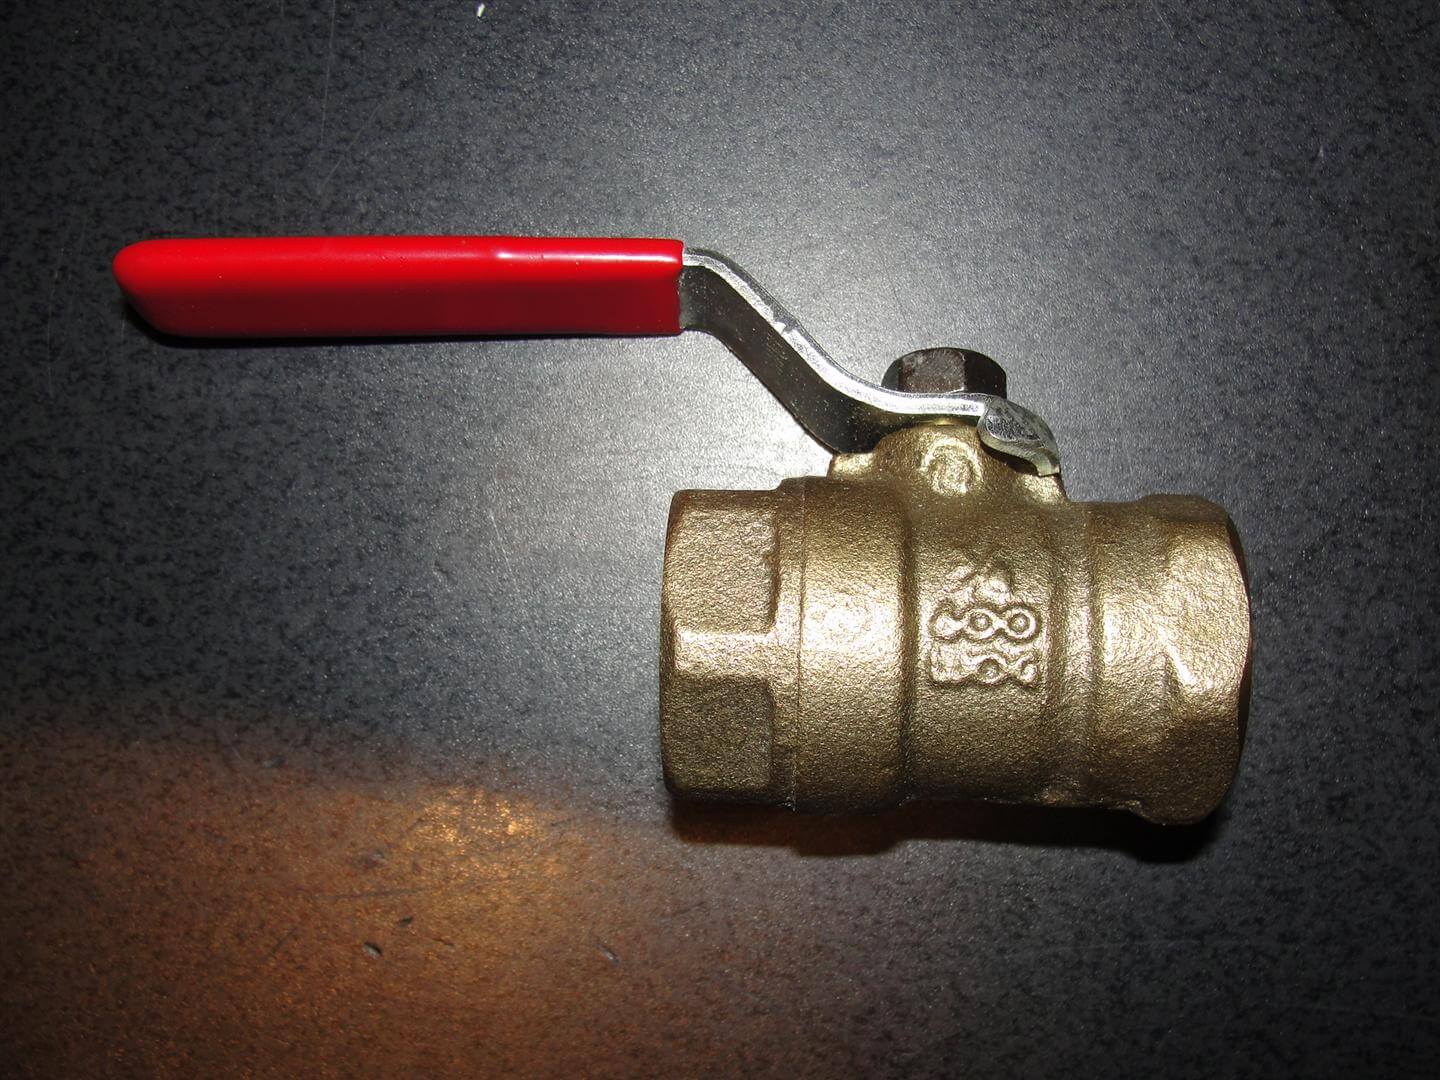 Problems with shut-off valves - HomesMSP